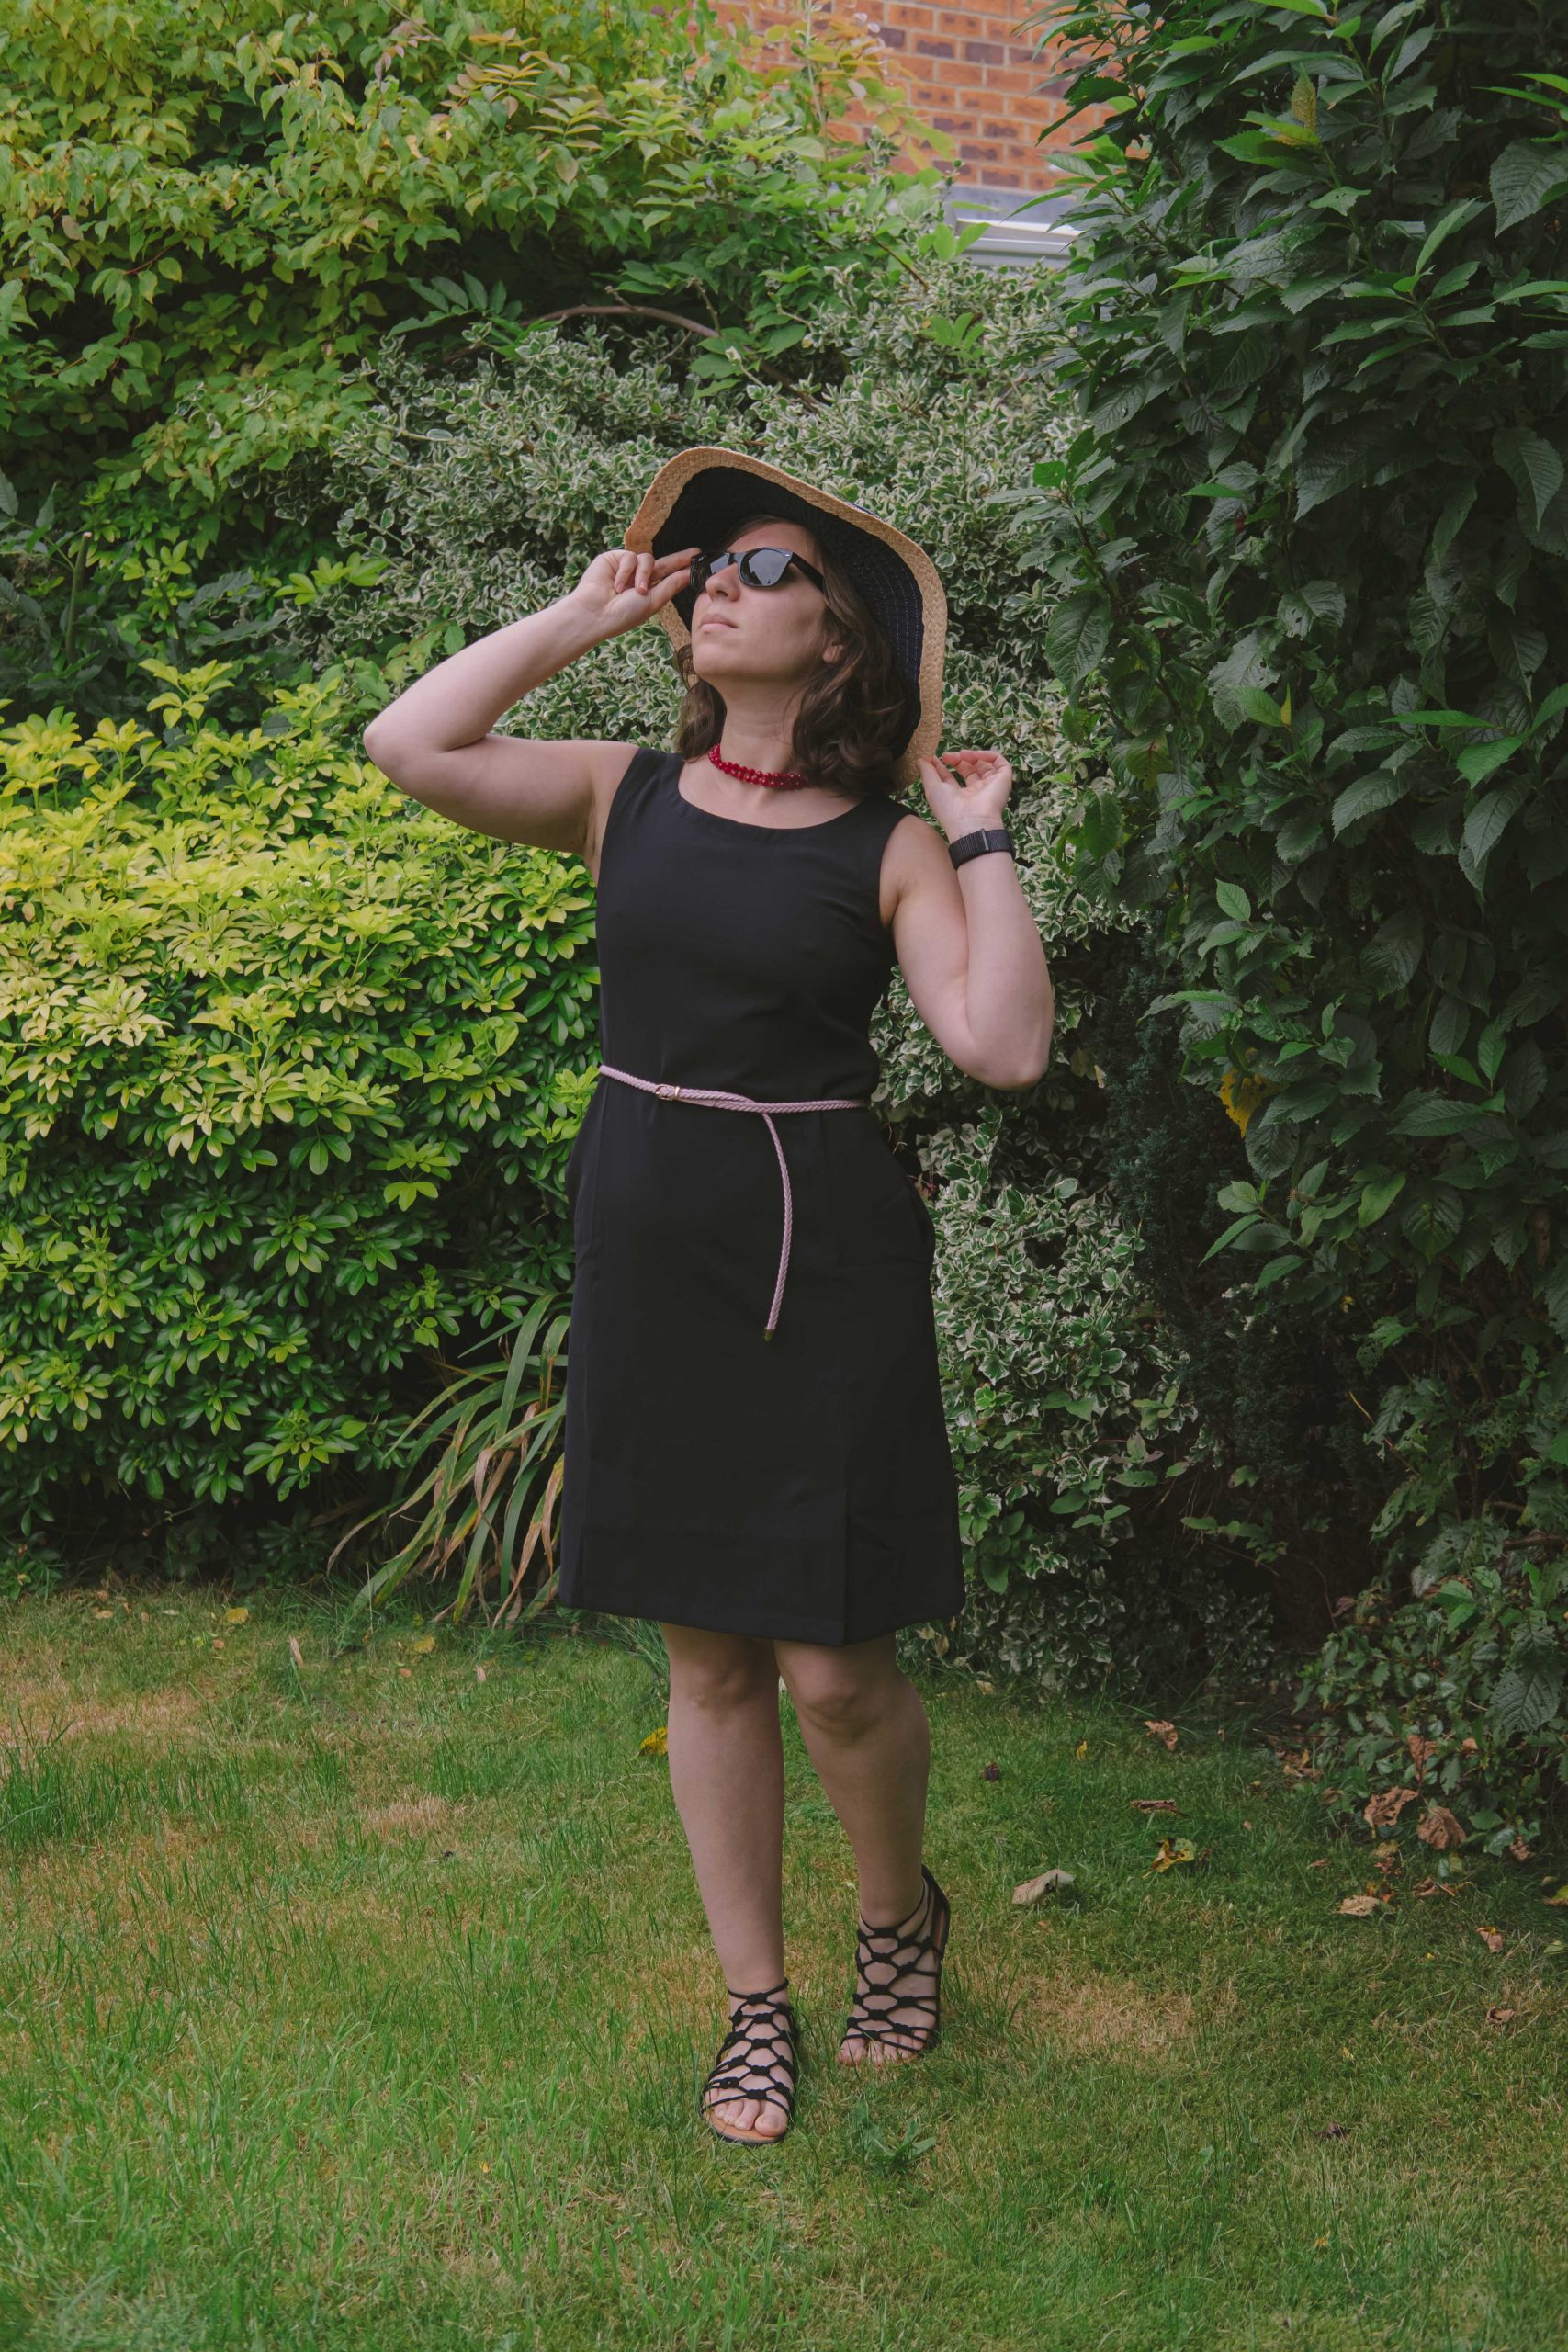 Beautiful Trevi dress from Bluffworks worn by Cory  at the botanical gardens in the UK